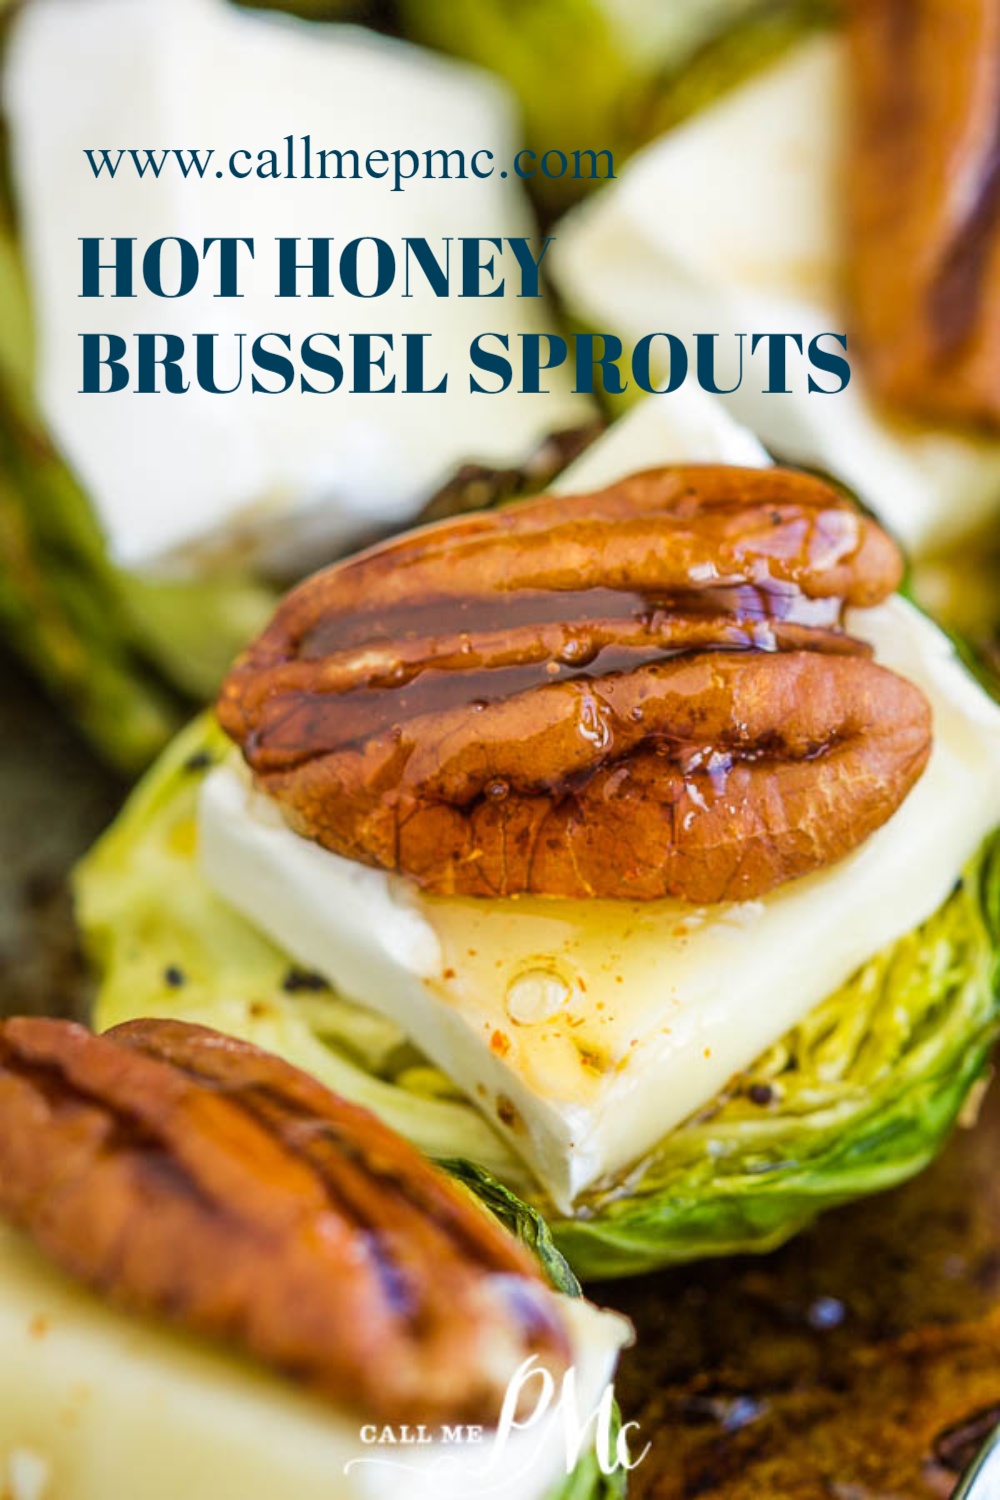 Gluten free · Serves 10 · The ultimate appetizer recipe!! Roasted Brussel sprouts with brie cheese, pecans, & hot honey! These tiny bites are the perfect appetizer or game day food that everyone go crazy about! #hothoney #superbowl #healthyappetizers #gameday #brusselsprouts #appetizerrecipes